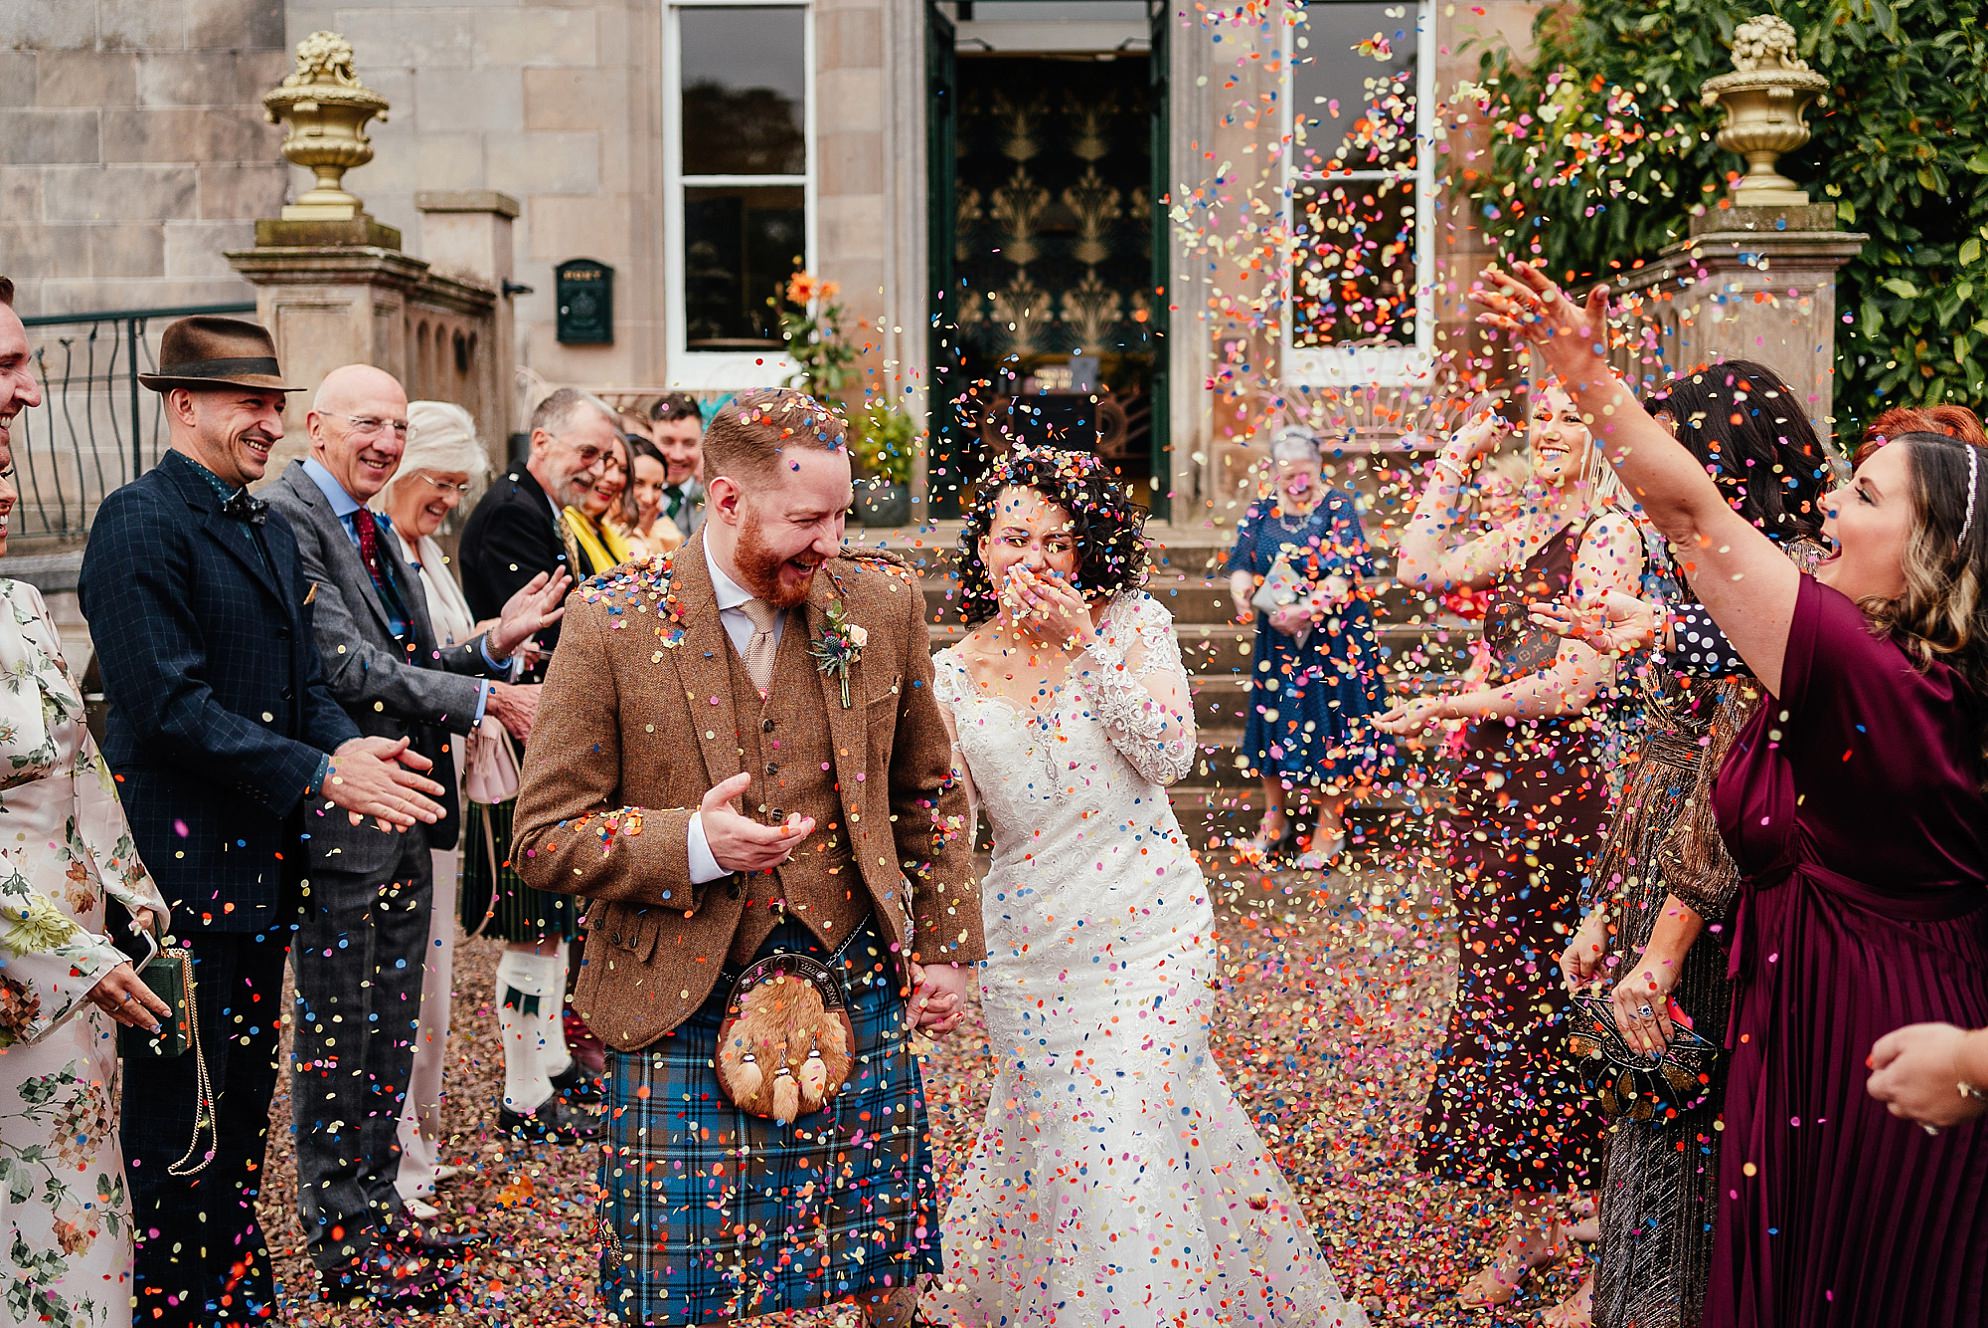 outside exterior view of Netherbyres House wedding in Eyemouth Scotland on an Autumn day A laughing fun-filled bride and groom walk through a crowd of bright and colourful smiling guests throwing confetti and delighting as the bride laughs at having lots of confetti in her mouth The guests are in a red gravel filled courtyard by traditional Victorian era red sandstone steps at an ornate porch flanked with arched stone banisters topped with gold urn-shaped sculptures  and surrounded by trees